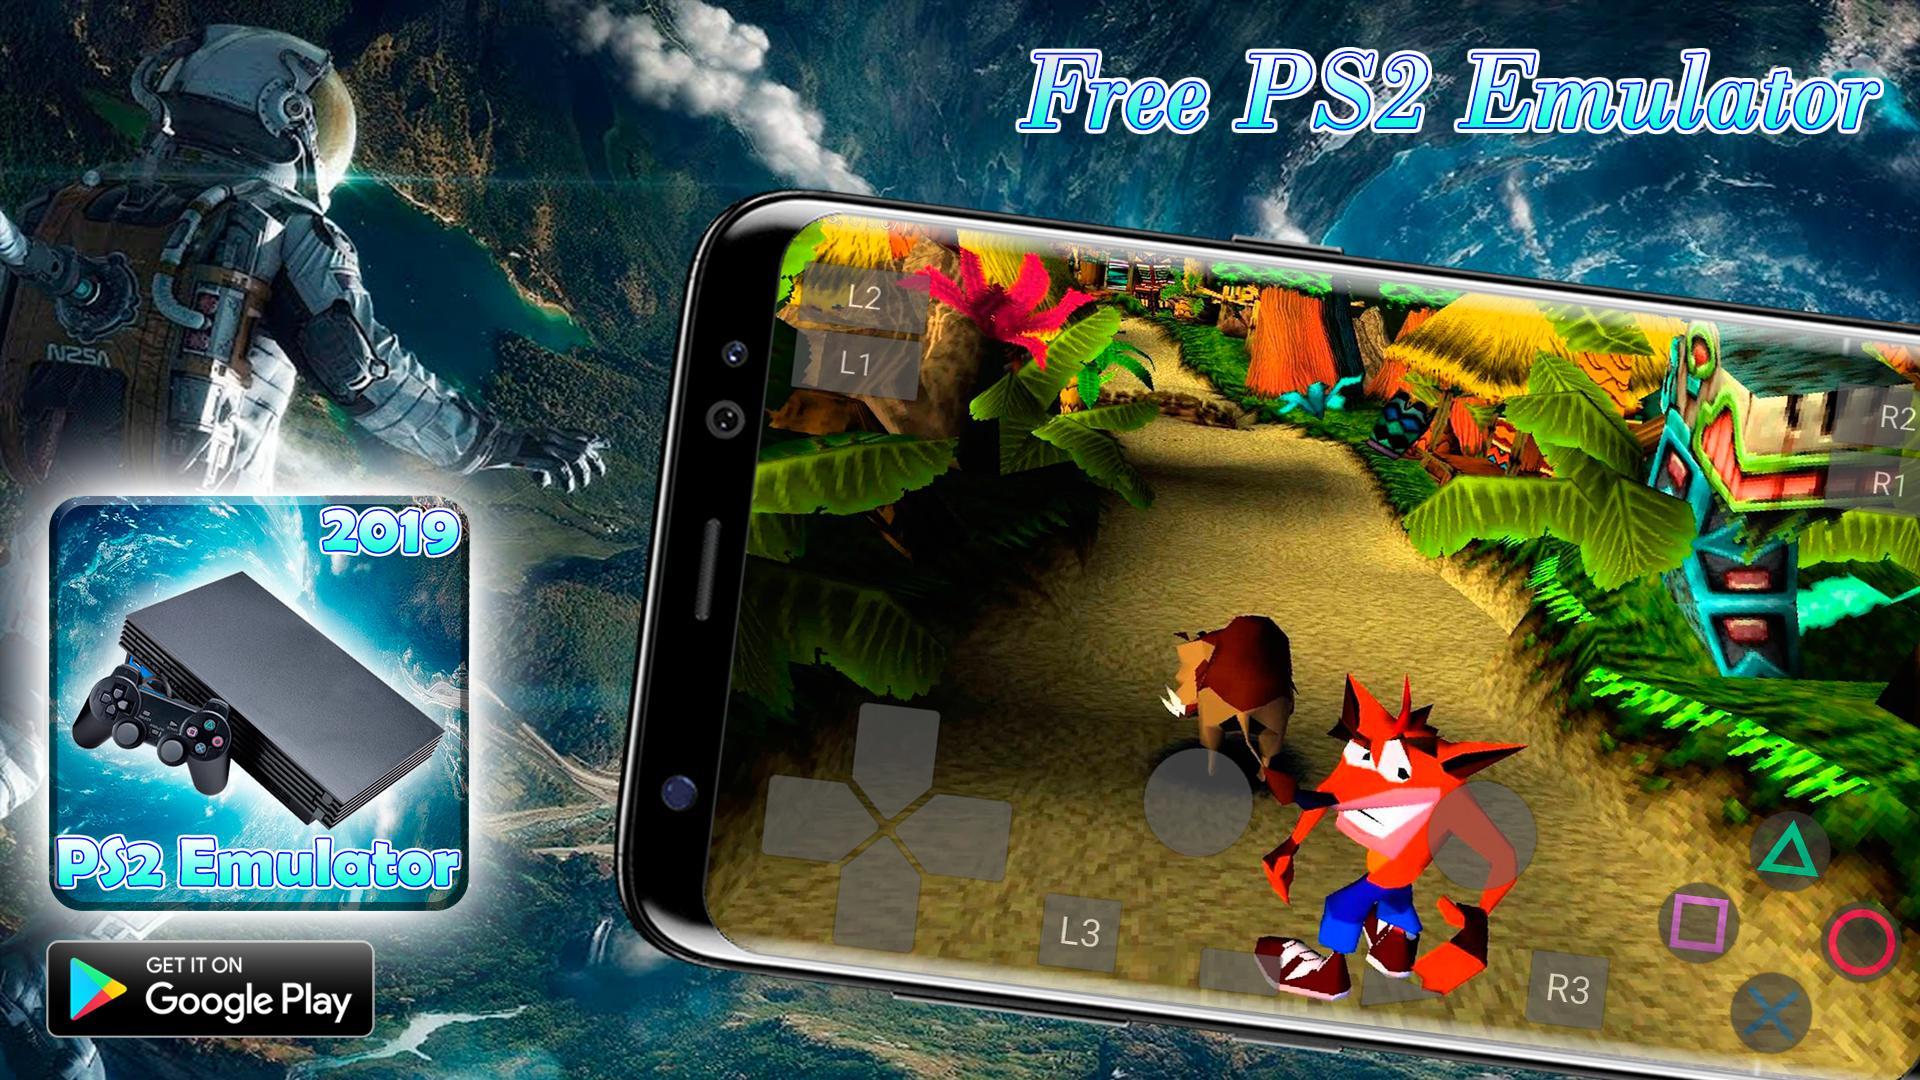 Free Pro PS2 Emulator Games For Android 2019 for Android ... - 